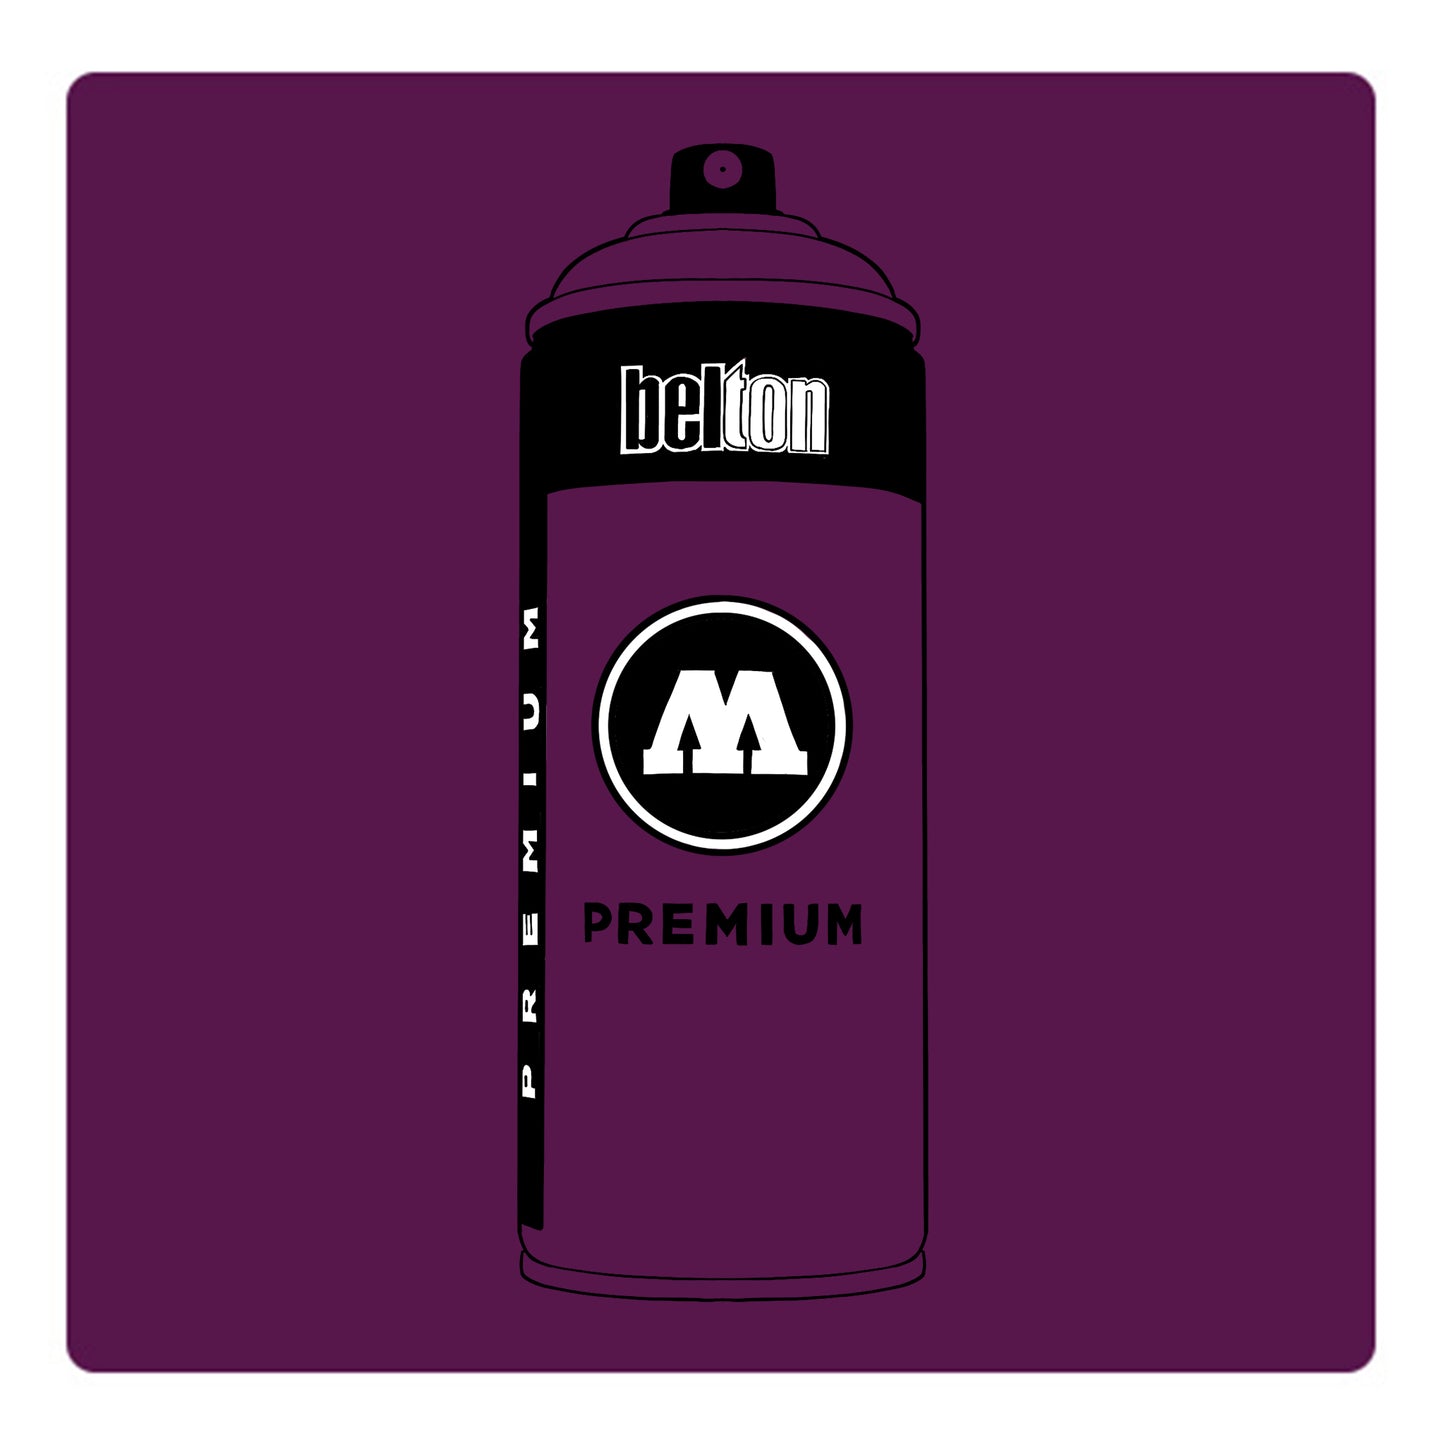 A black outline drawing of a purple spray paint can with the words "belton","premium" and the letter"M" written on the face in black and white font. The background is a color swatch of the same purple with a white border.